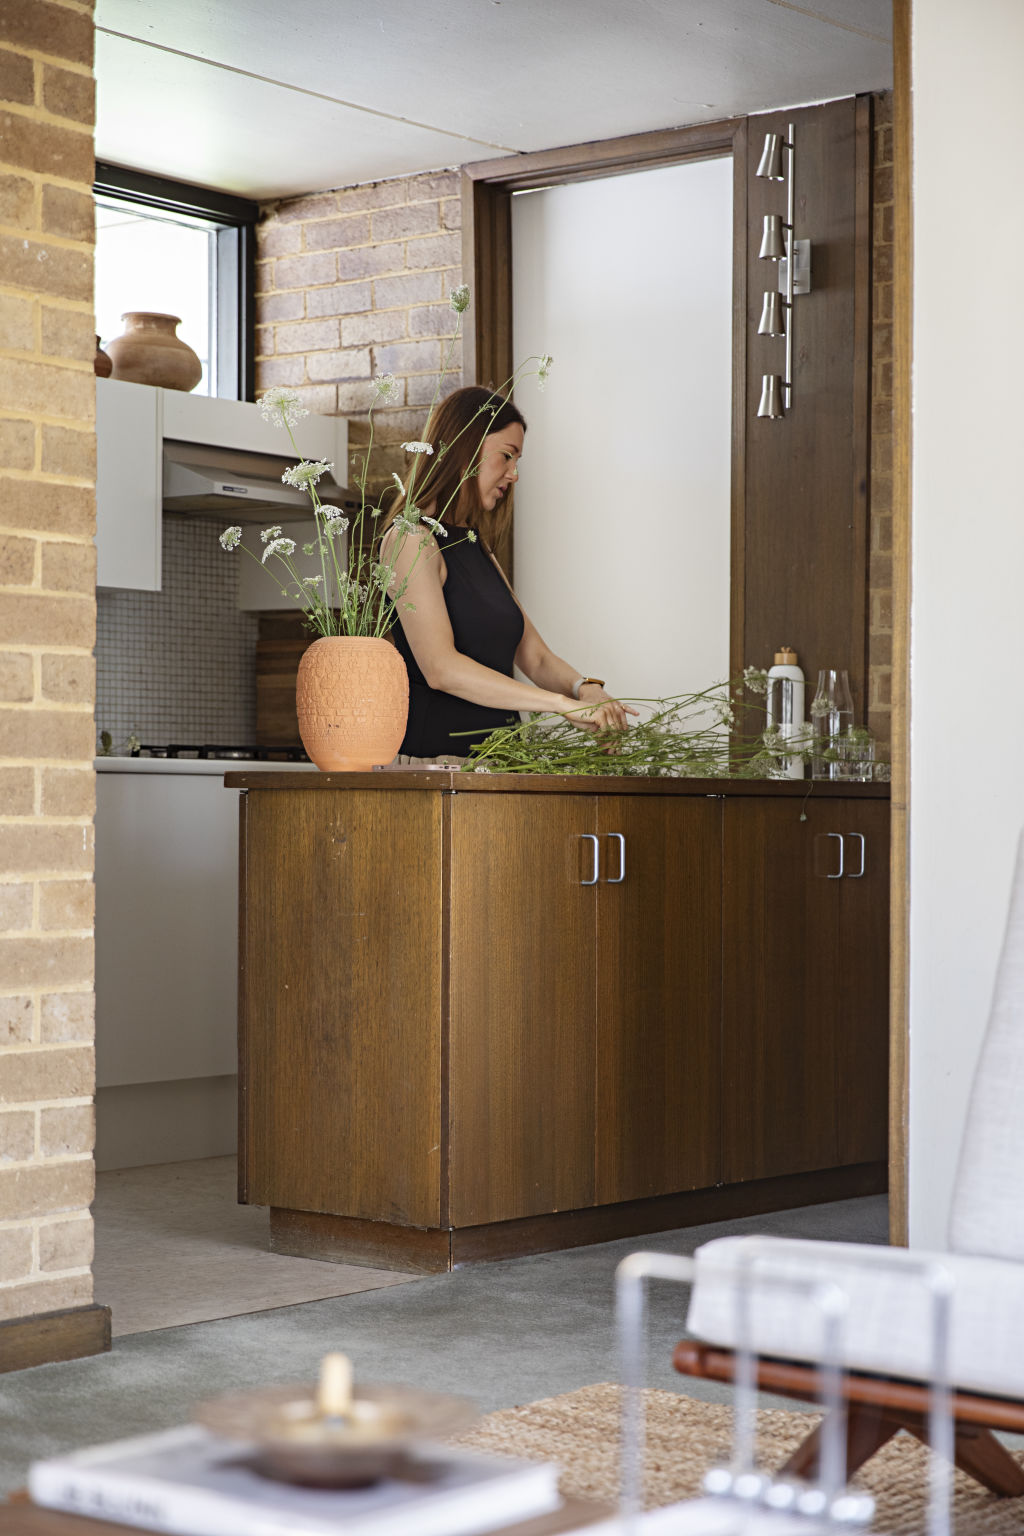 Brown instantly fell in love with the home's architecture. Photo: Natalie Jeffcott